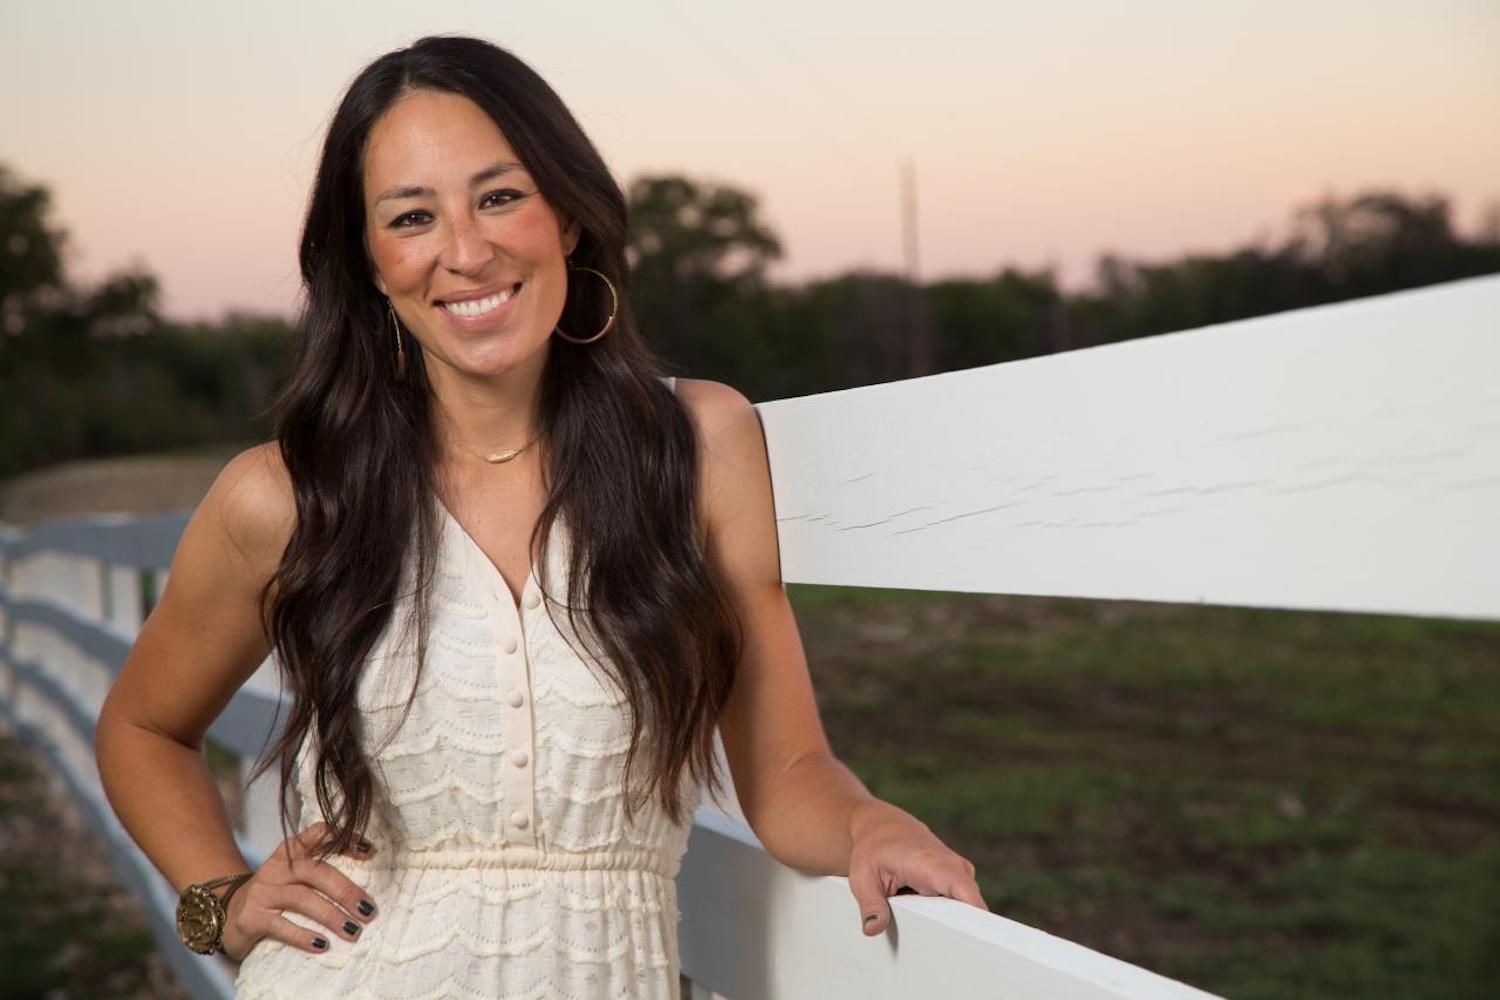 Joanna Gaines Reveals Her Top Paint Colors For 2018 Simplemost.